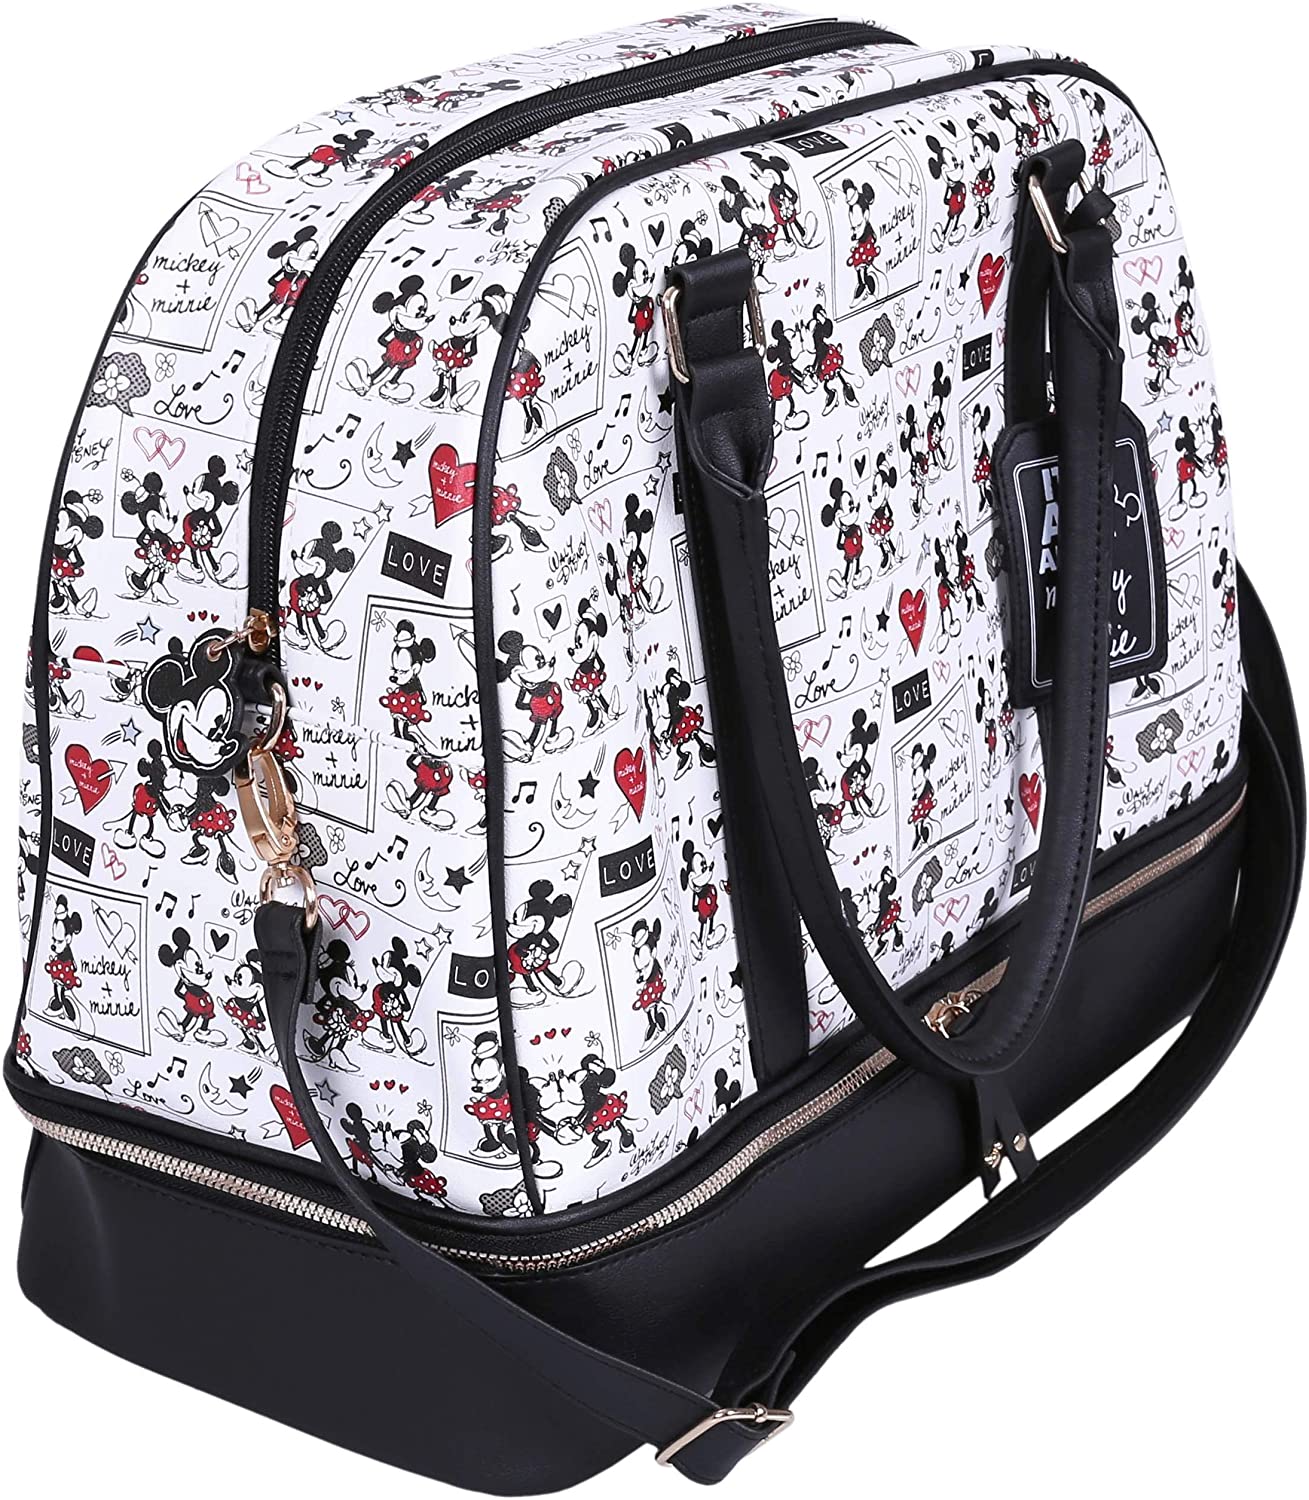 Disney Mickey And Minnie Mouse Weekend Travel Luggage